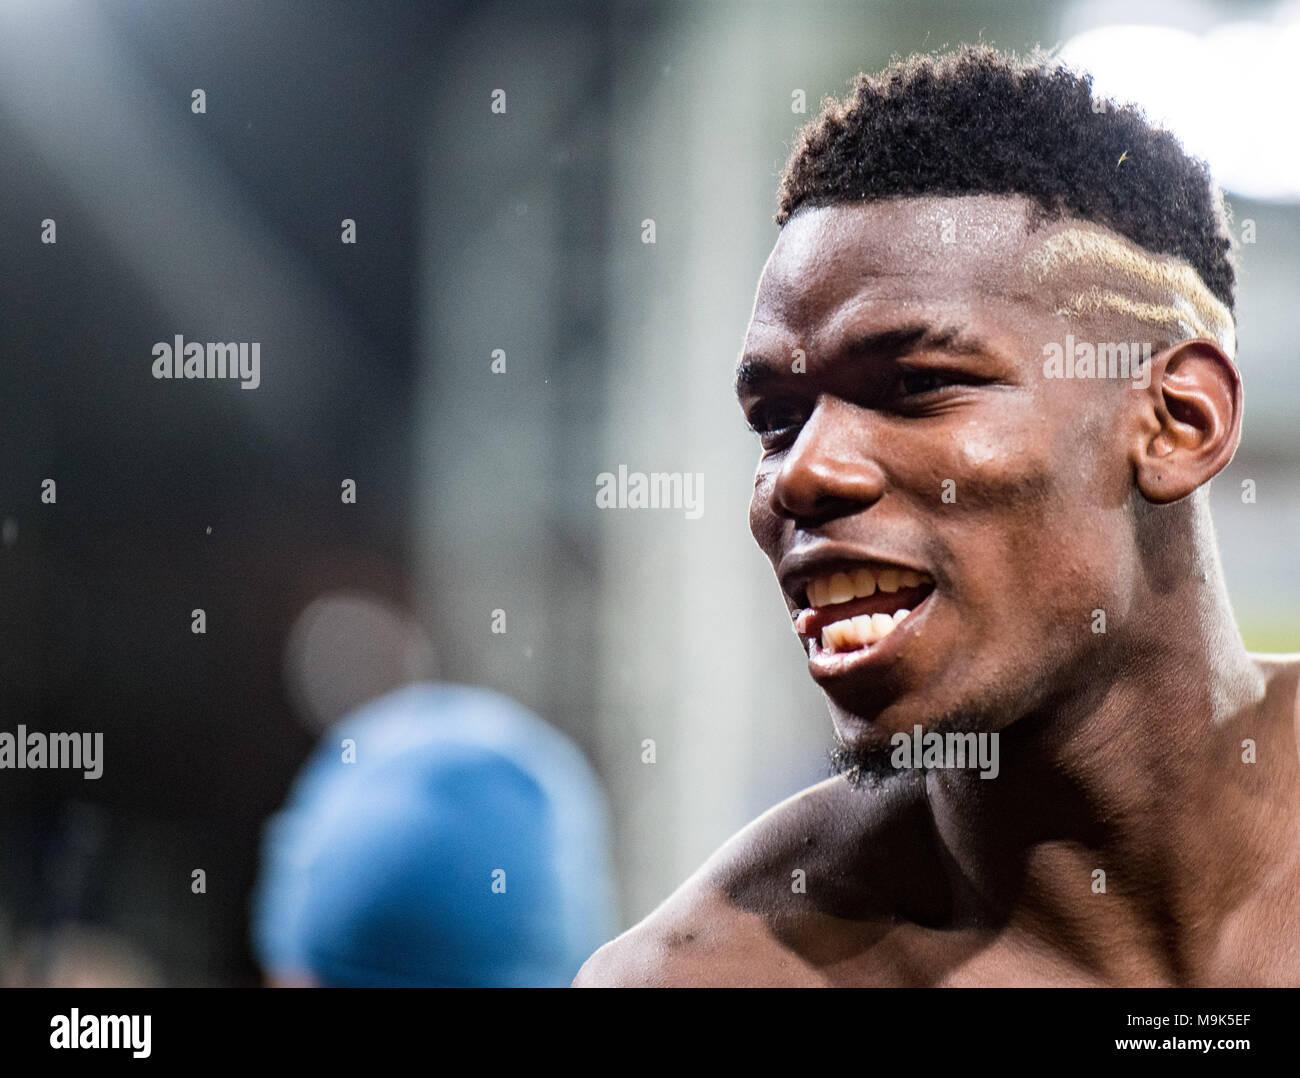 05 March ,London ,England , Selhurst Park stadium , Paul Pogba Manchester United player during the premier league match vs Crystal Palace Stock Photo